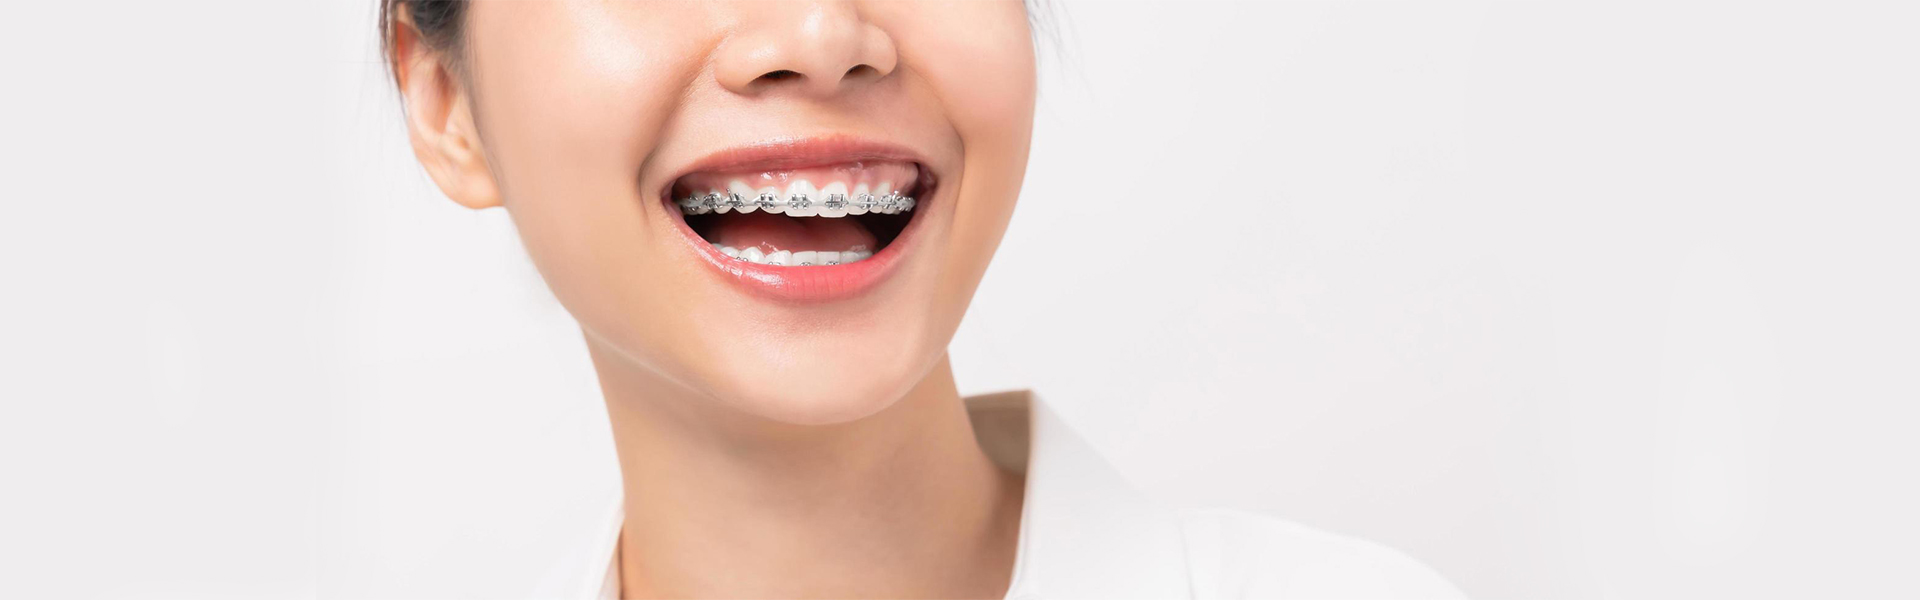 A Basic Guide to Orthodontics